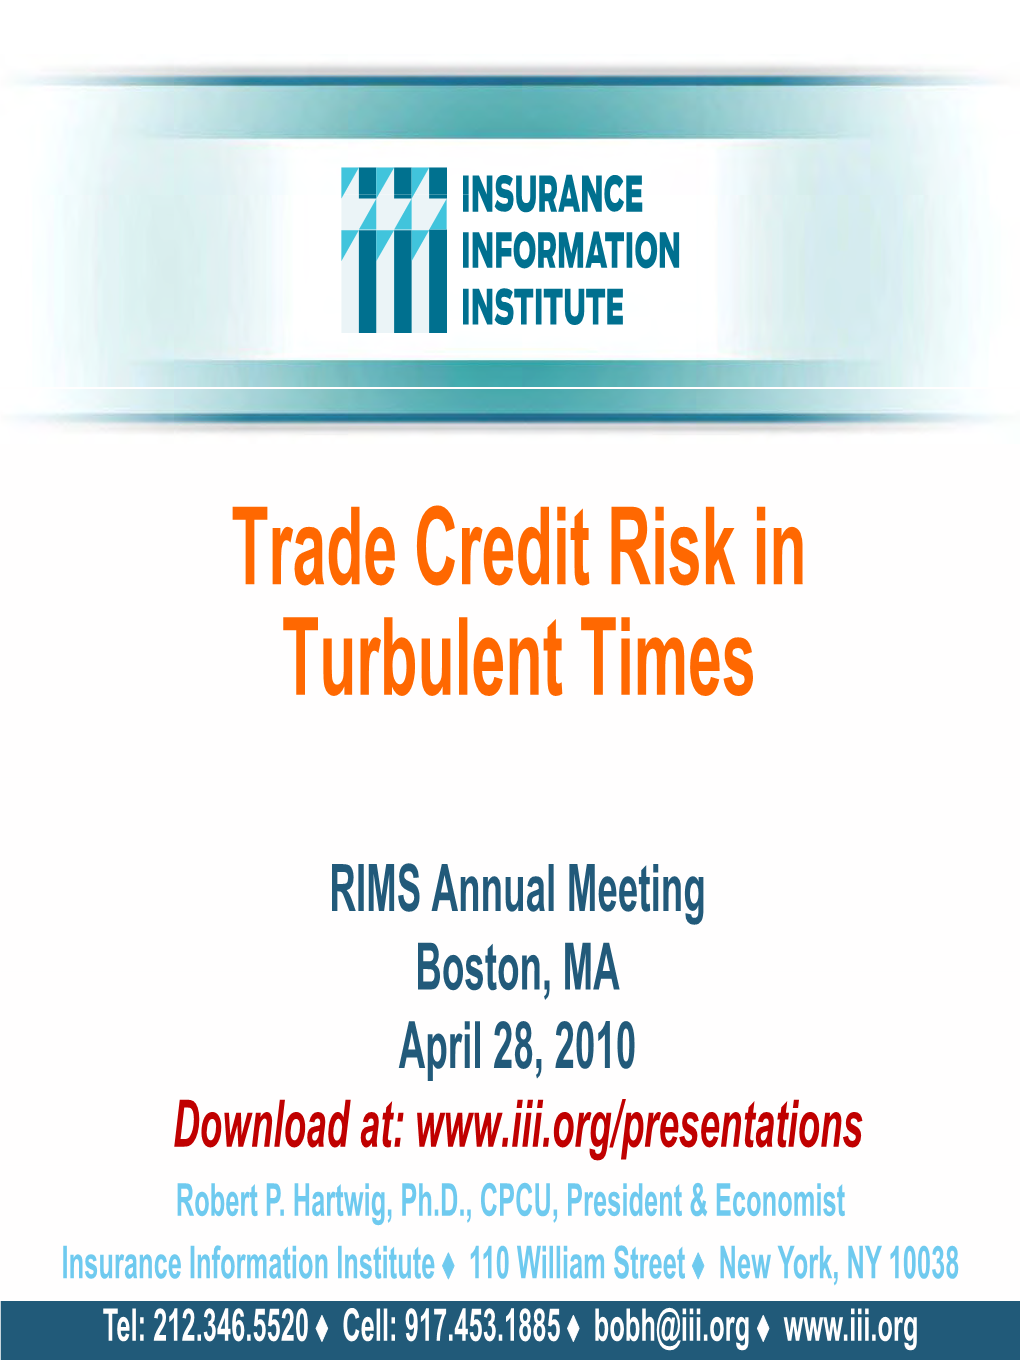 Trade Credit Risk in Turbulent Times